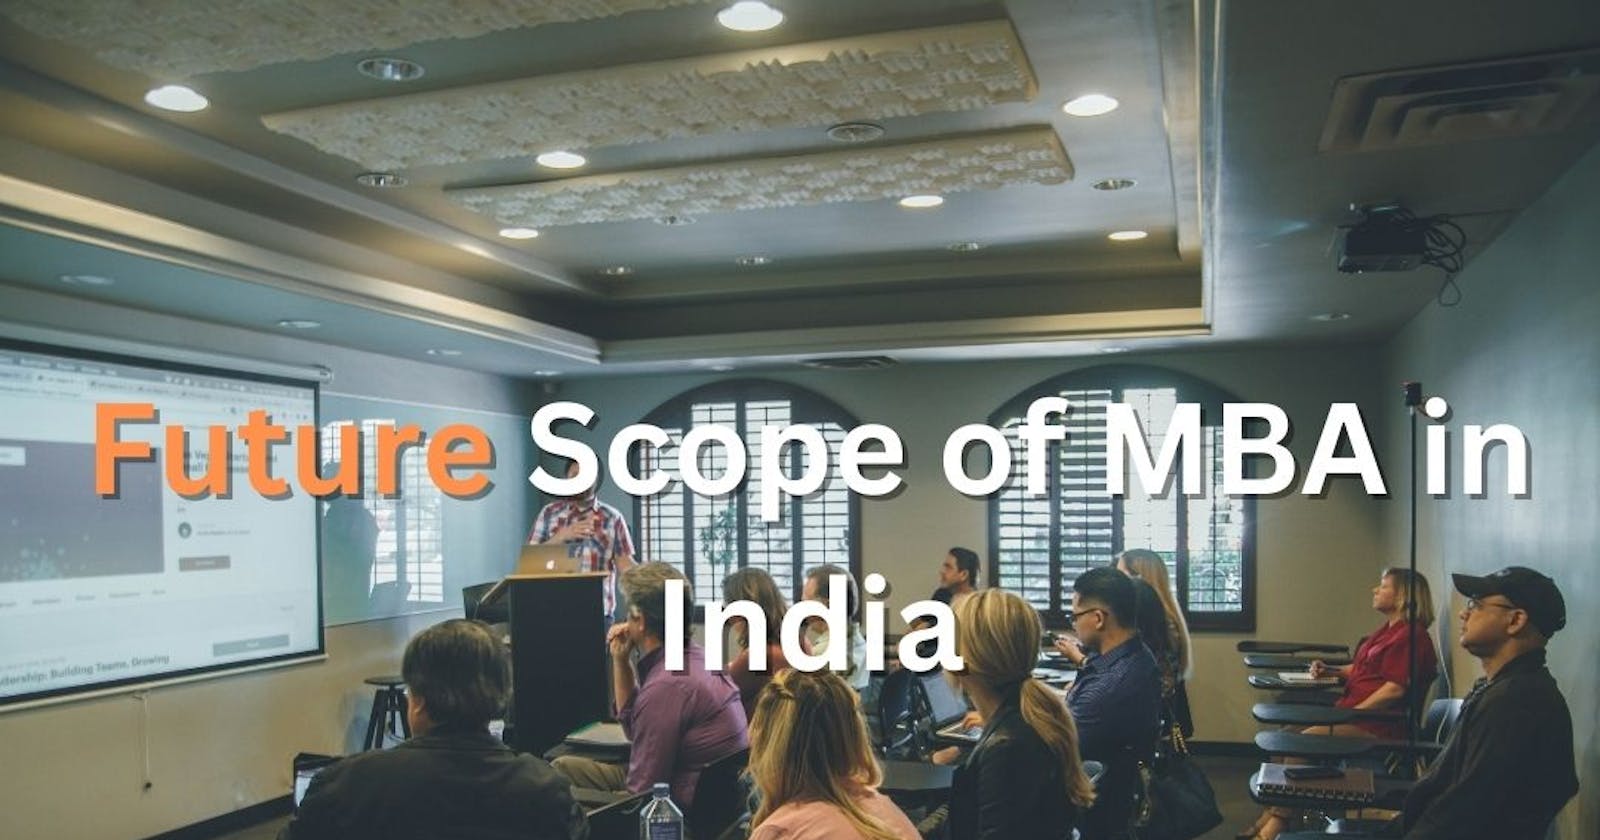 Future Scope of MBA in India